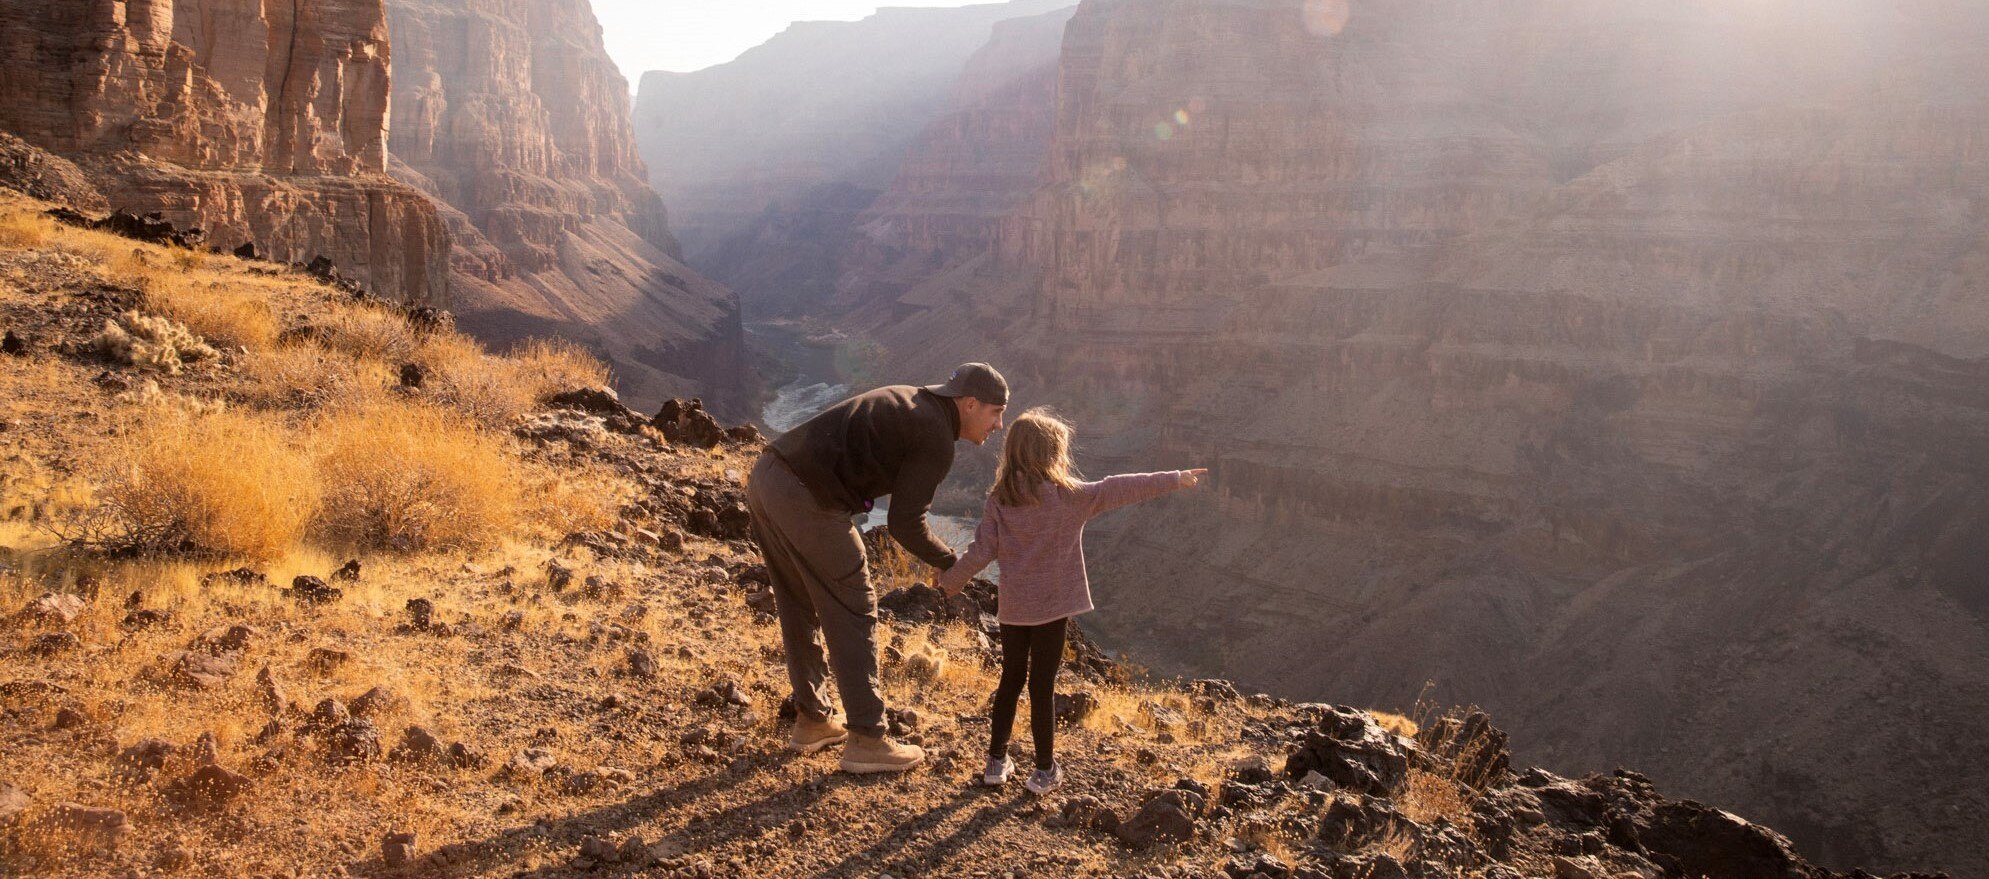 Man and young girl looking over and pointing at the view in the mountains